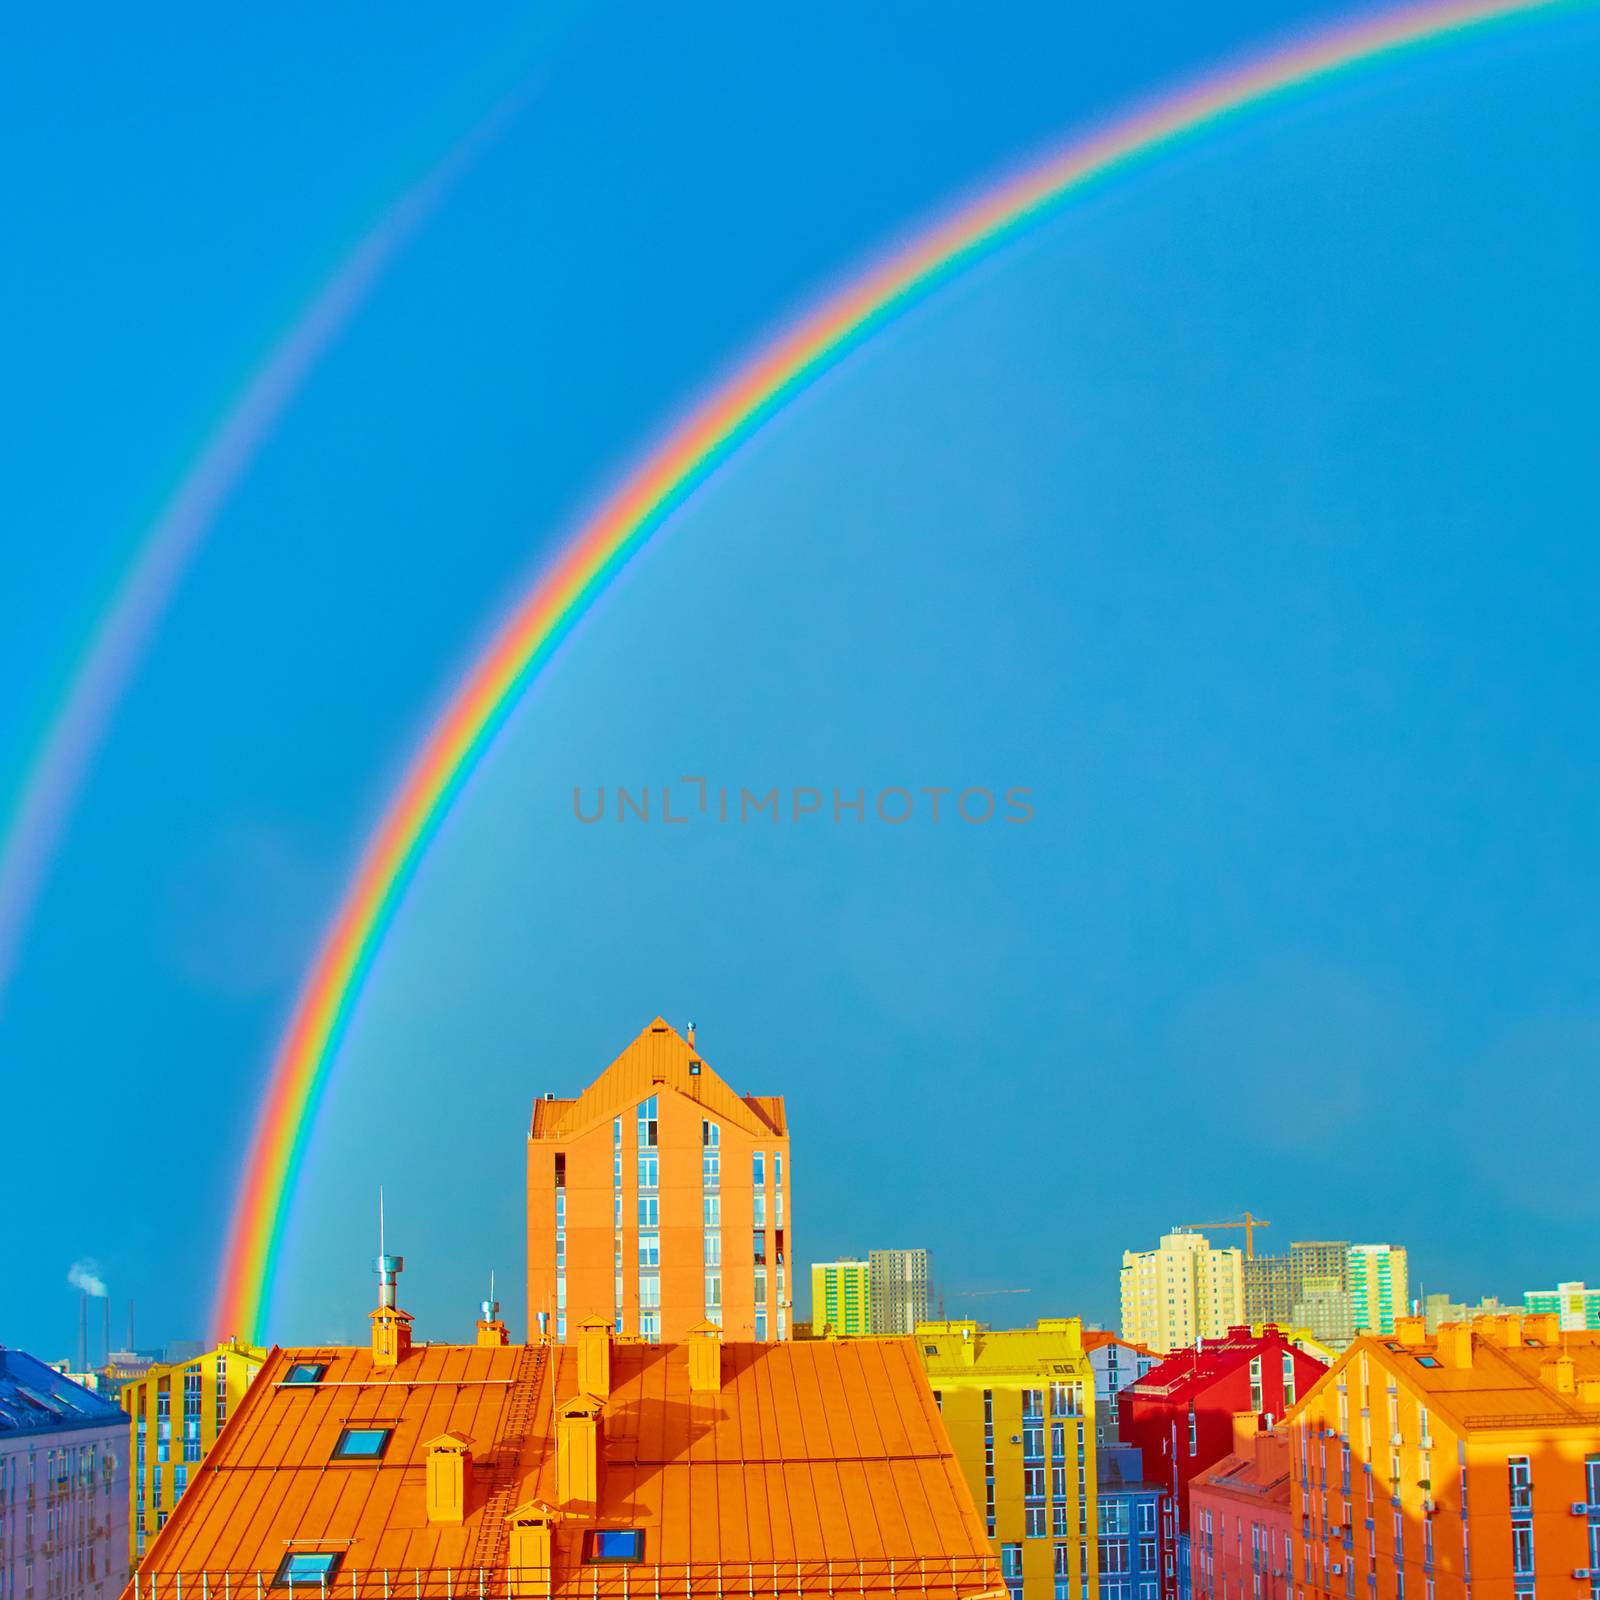 Double rainbow over bright colored houses. Kiev city